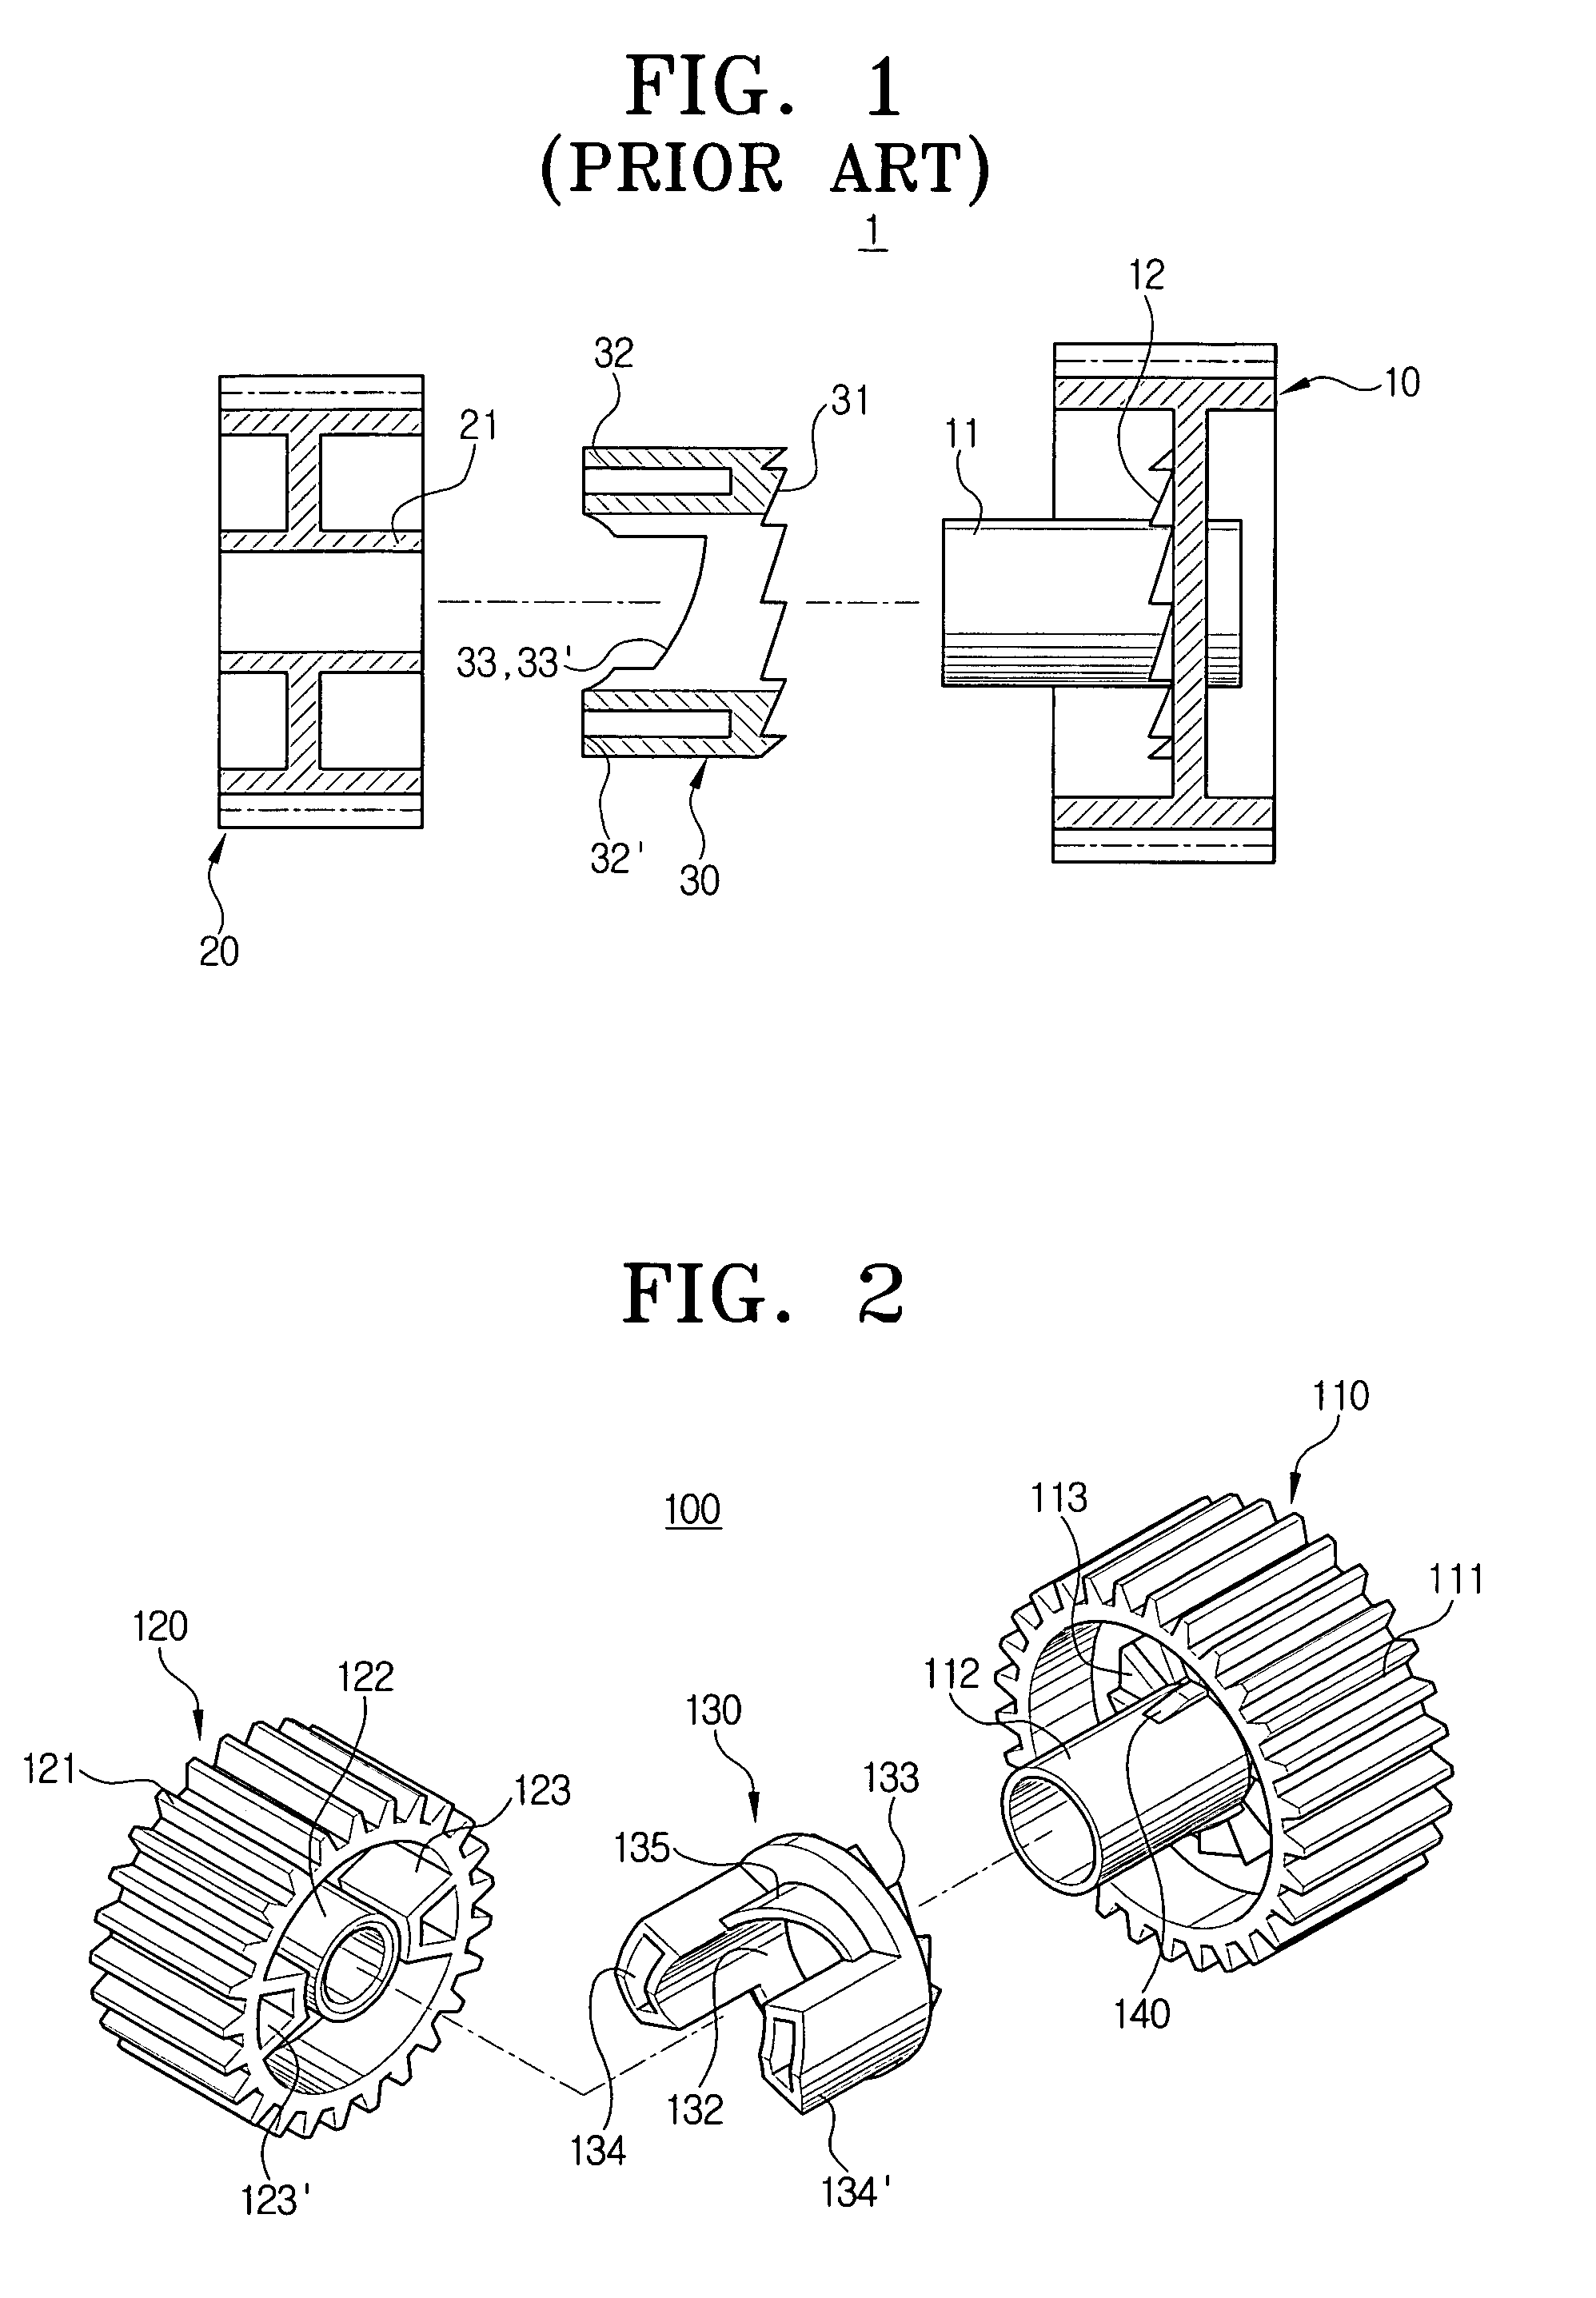 One-way power transmission unit, a fusing unit driving apparatus for duplex printer using the same, a method for one way power transmission, and a method for driving a fusing unit